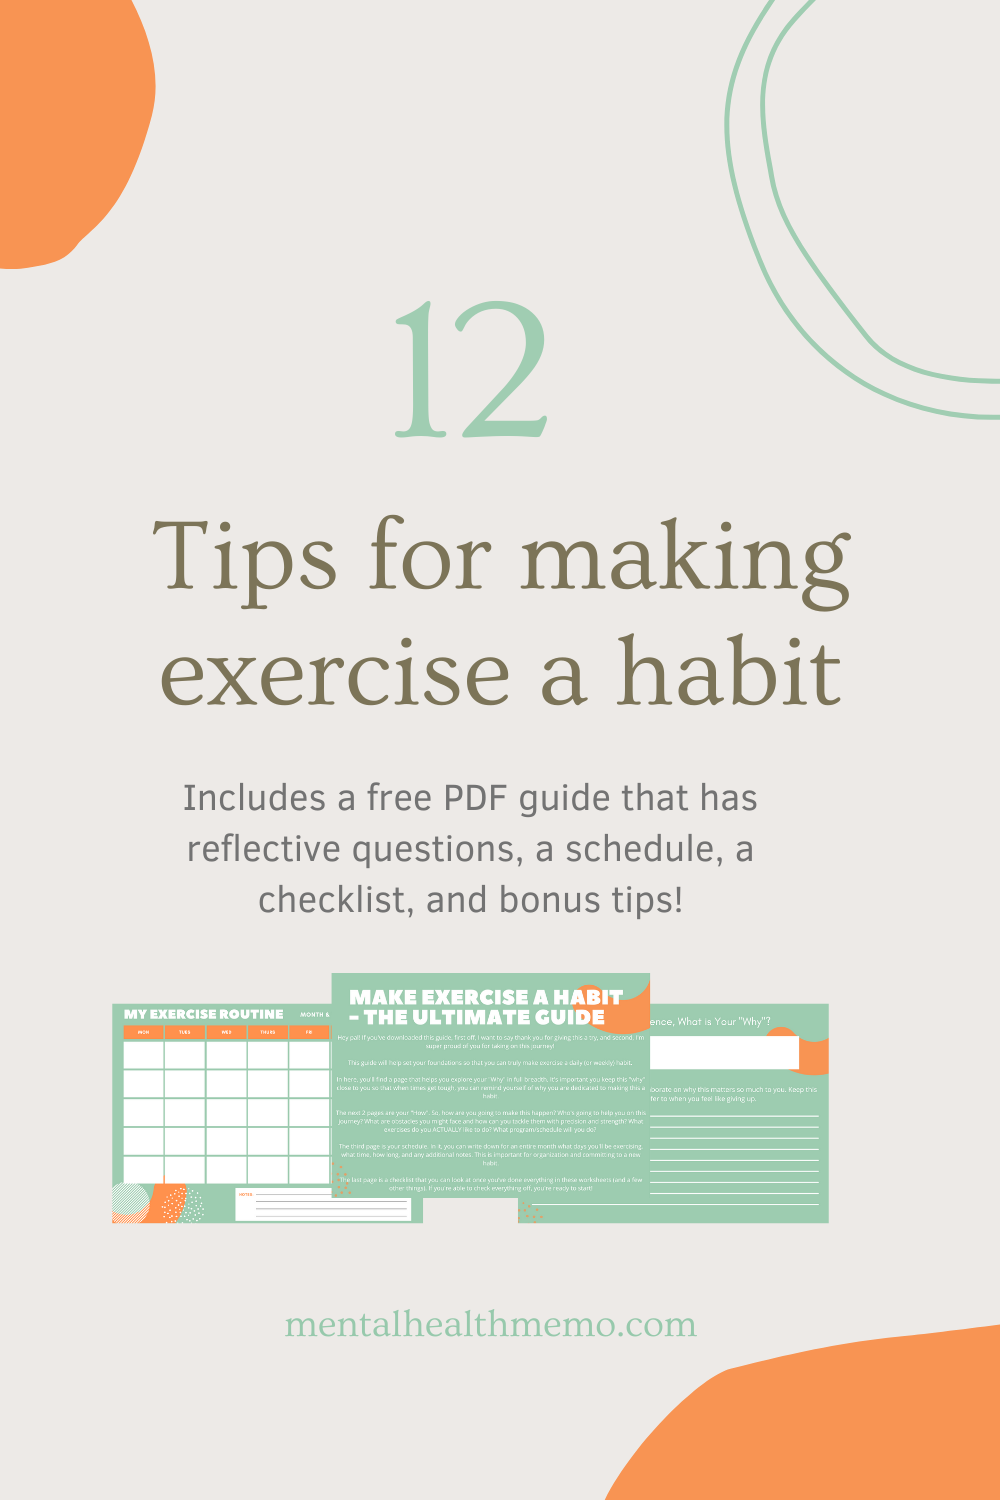 Pin: how to make exercise a habit